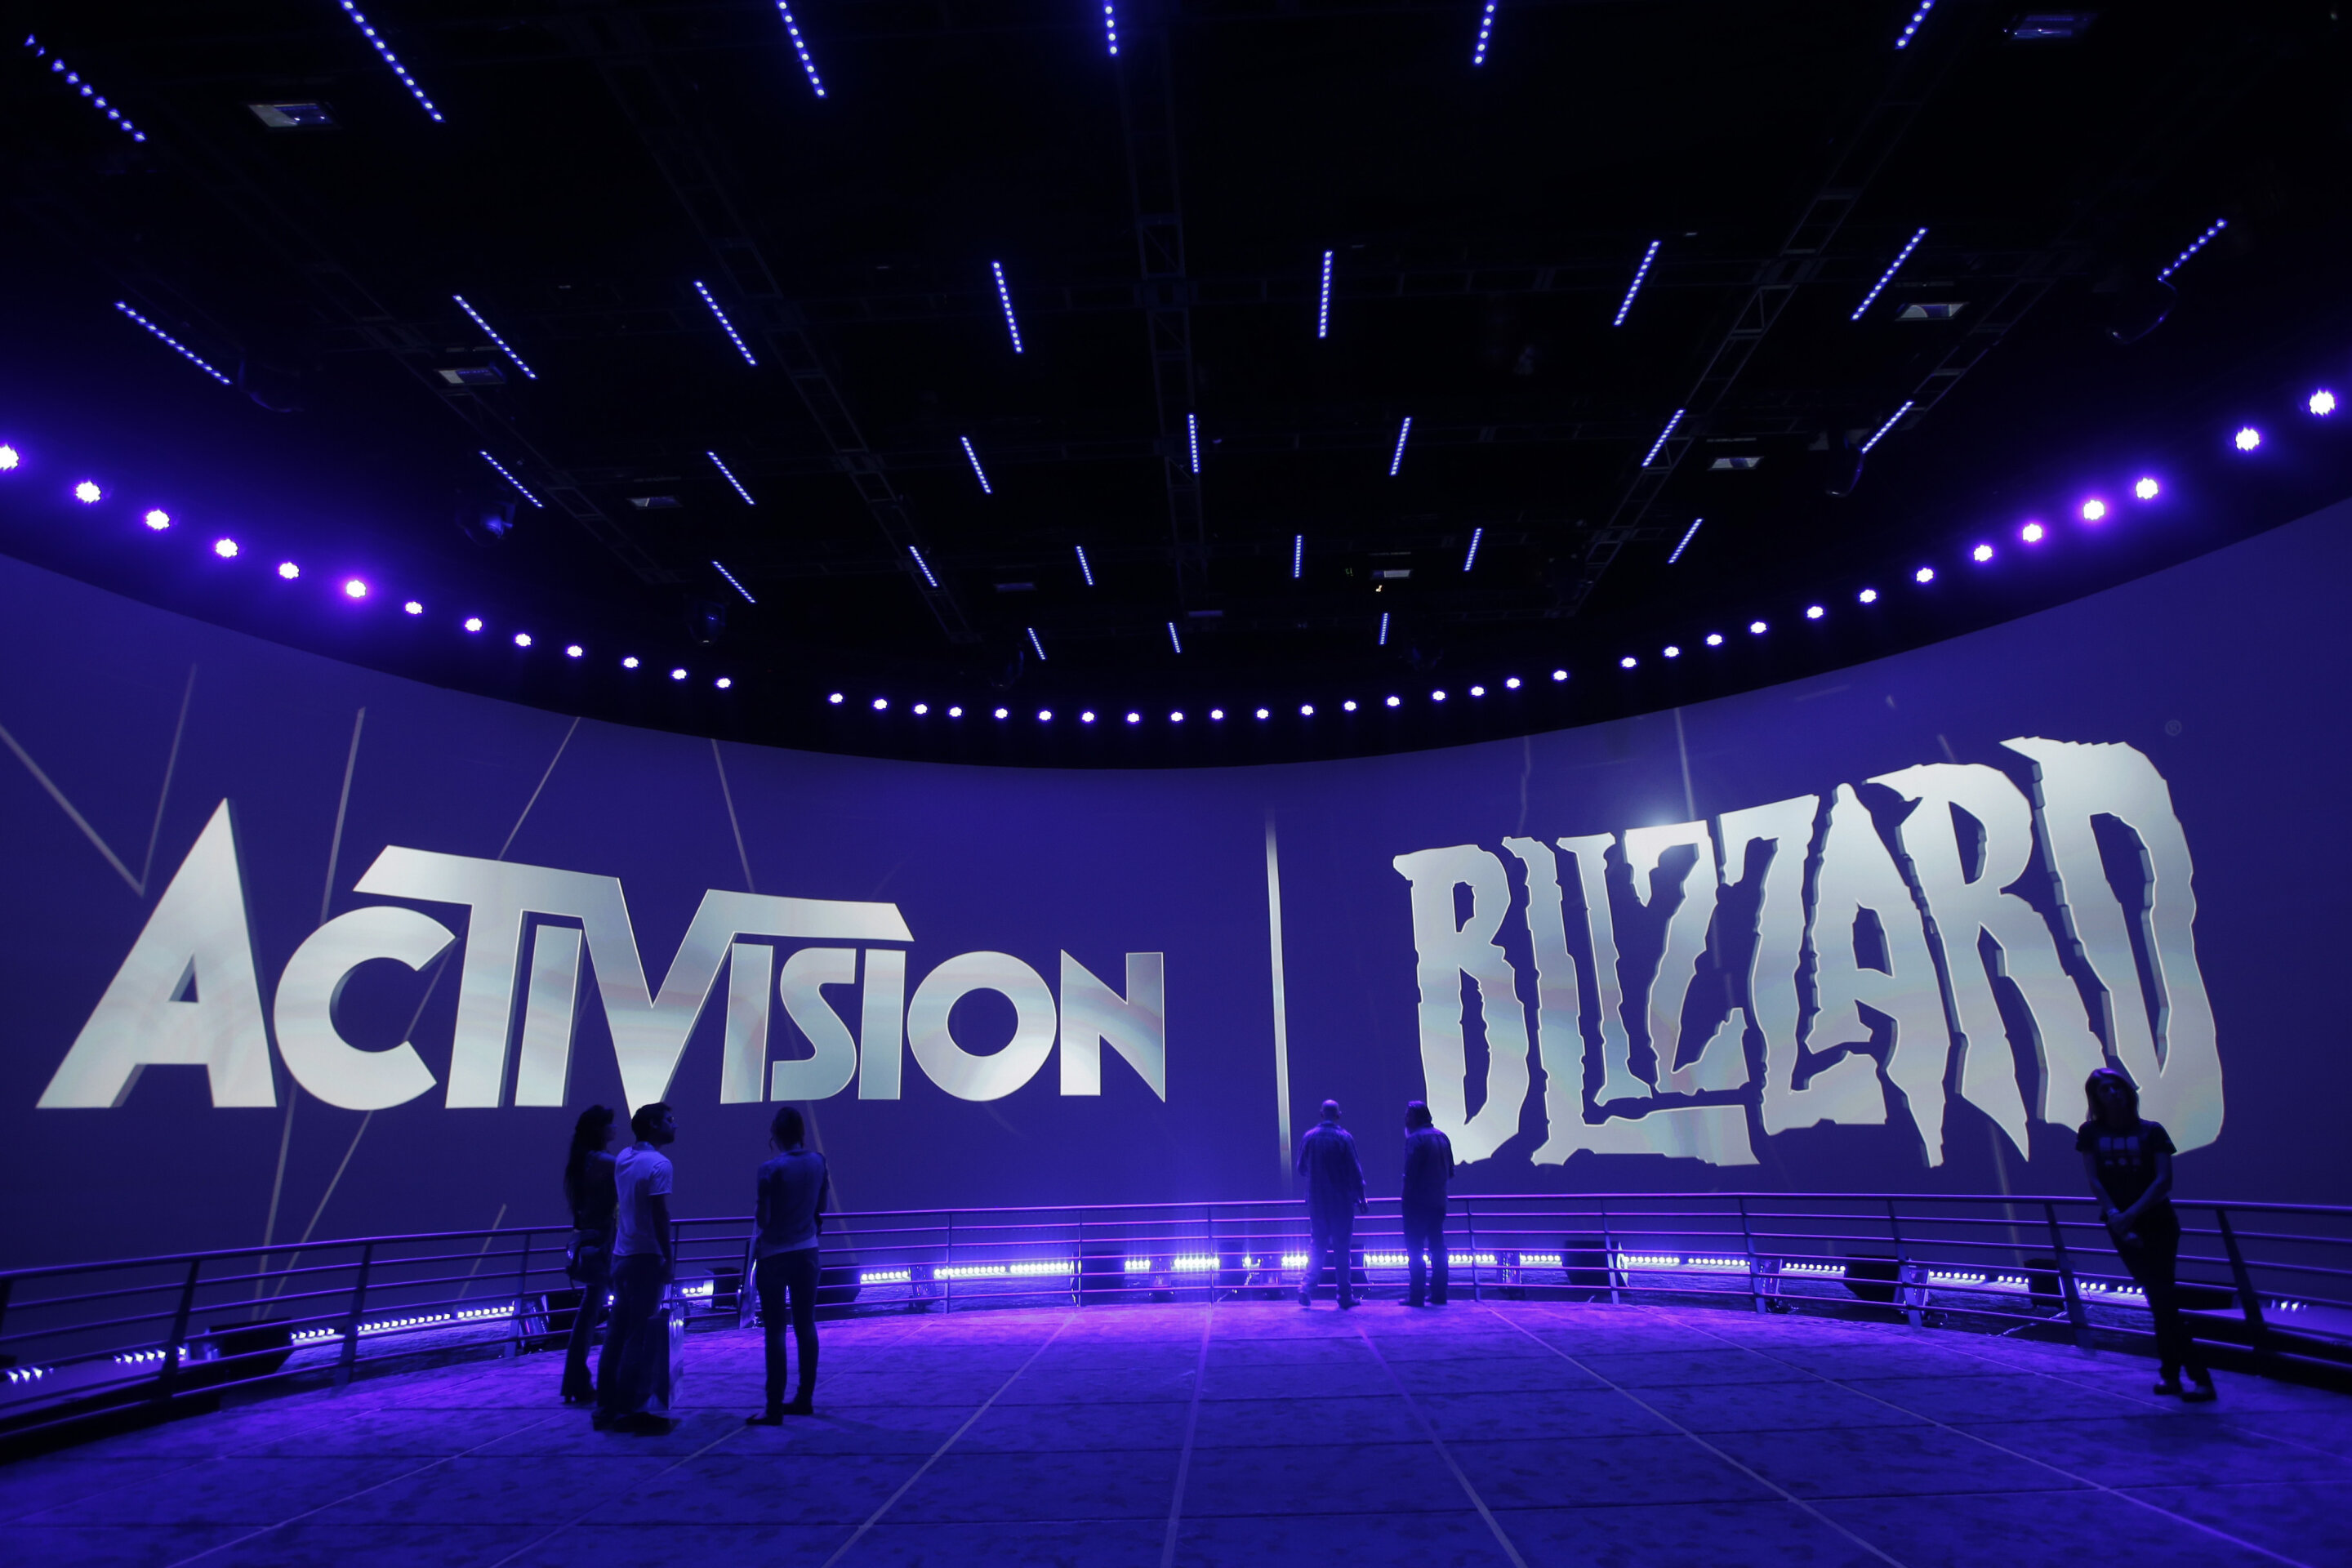 Video gamers sue to stop Microsoft’s Activision Blizzard buy